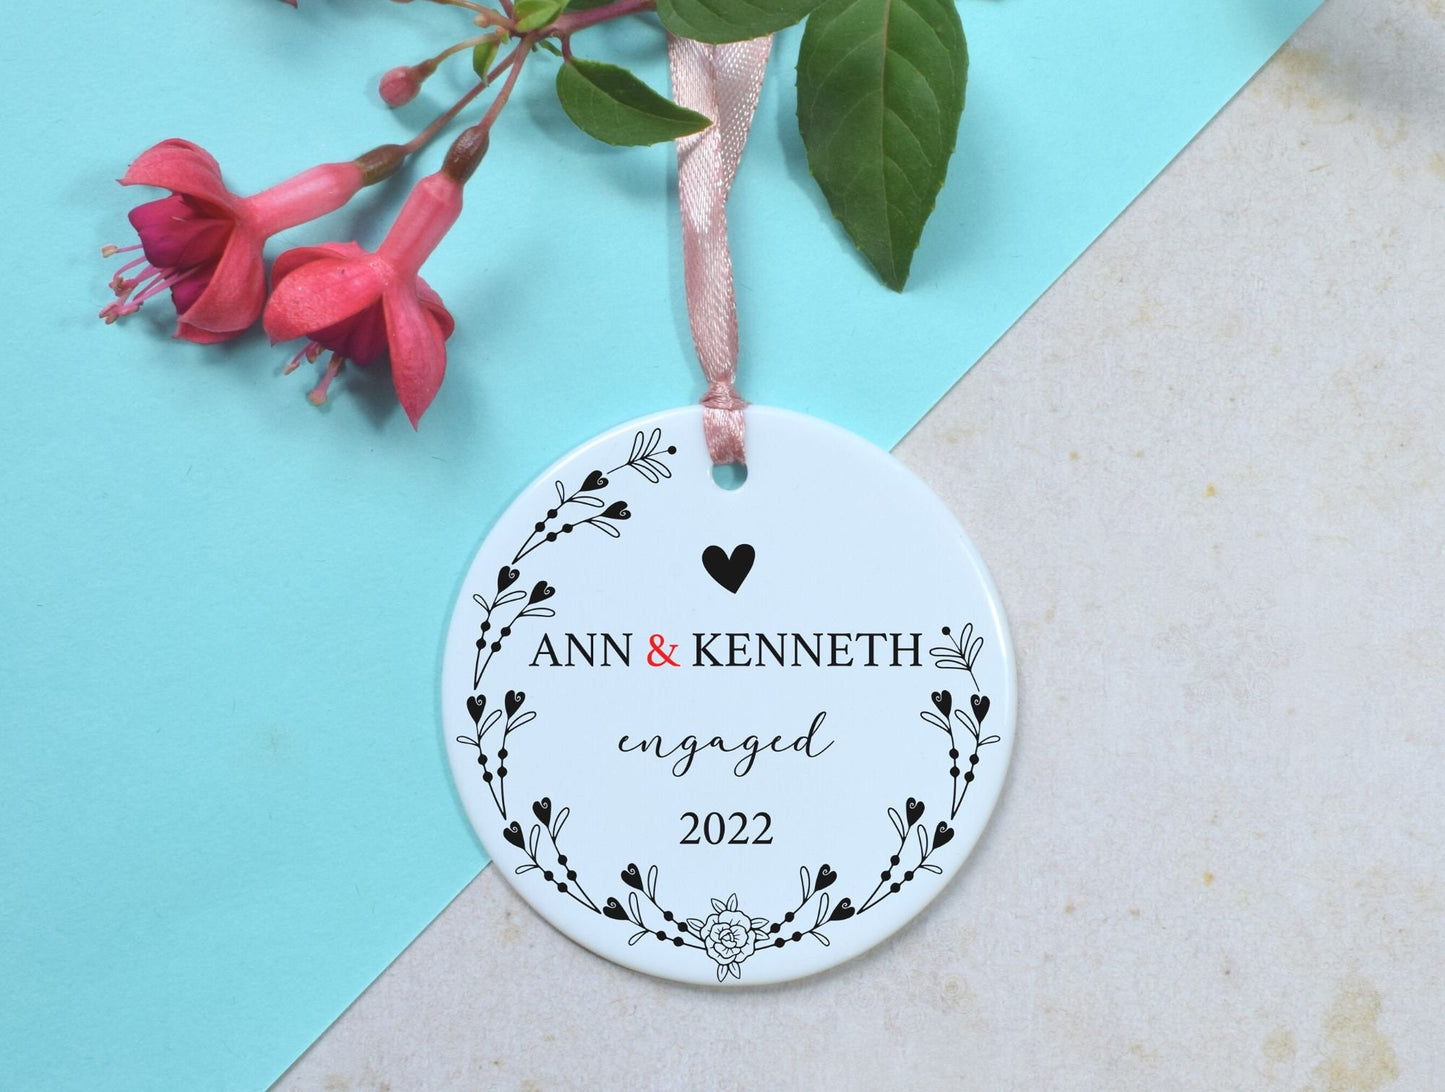 Engagement Day Keepsake Personalised Ornament Gift for Couple, Watercolour pink & red flower